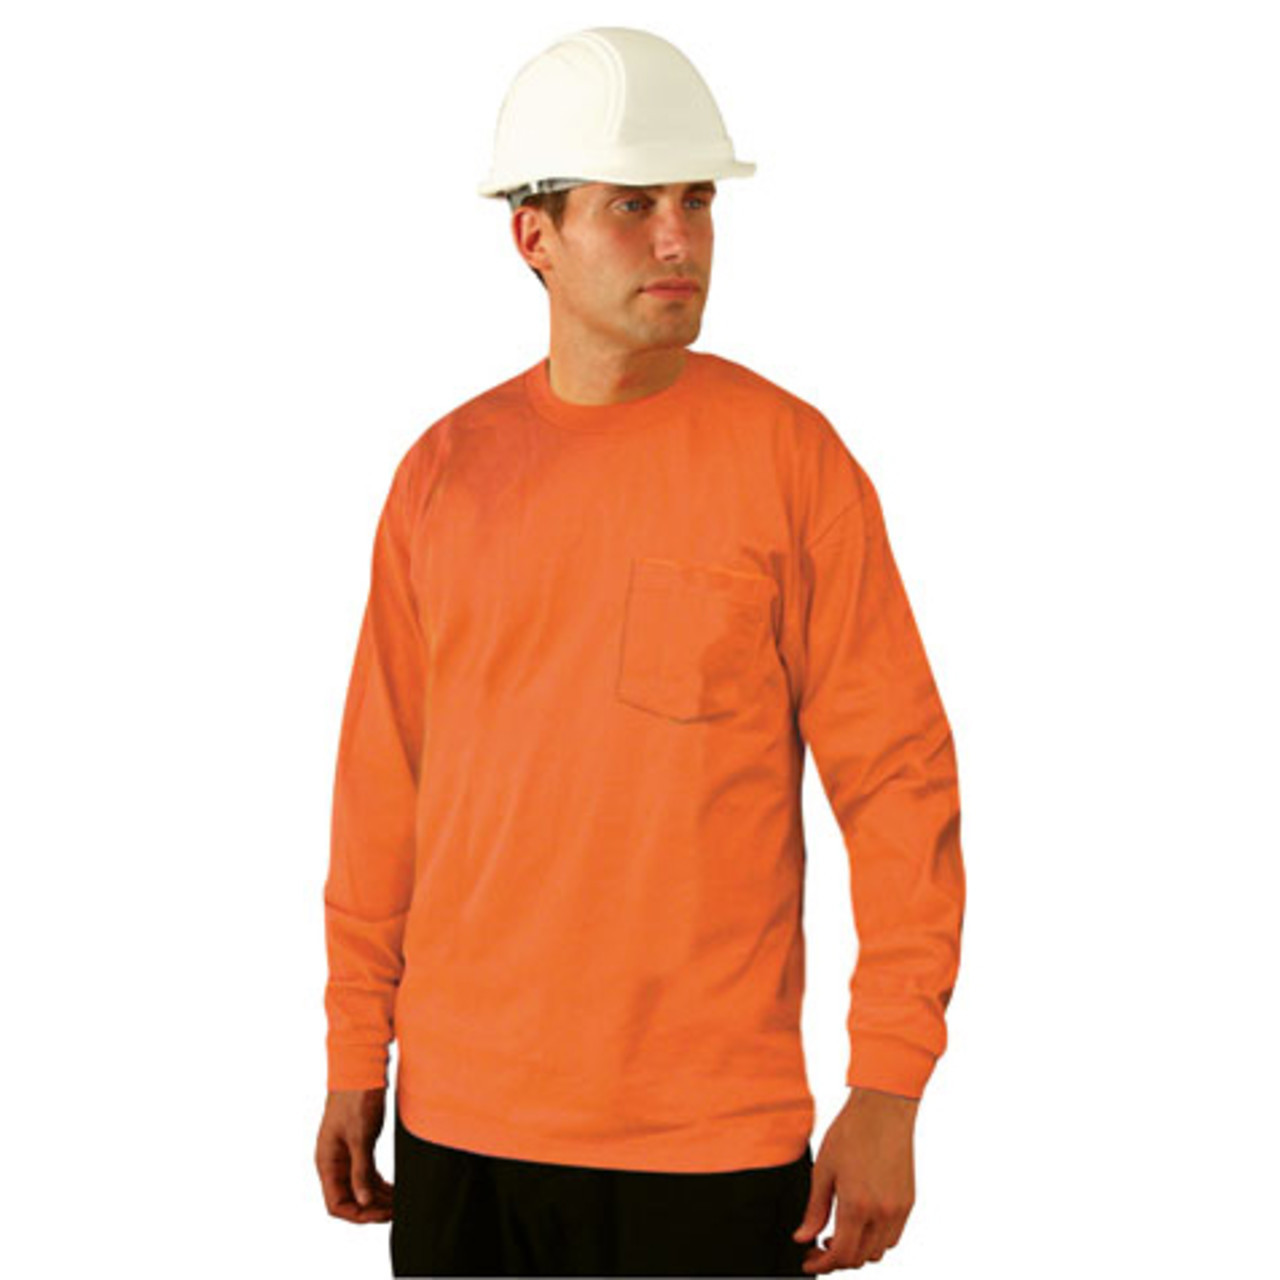 Image of OccuNomix Non-ANSI Orange Long Sleeve T-Shirt, USA Made - LUX300LP